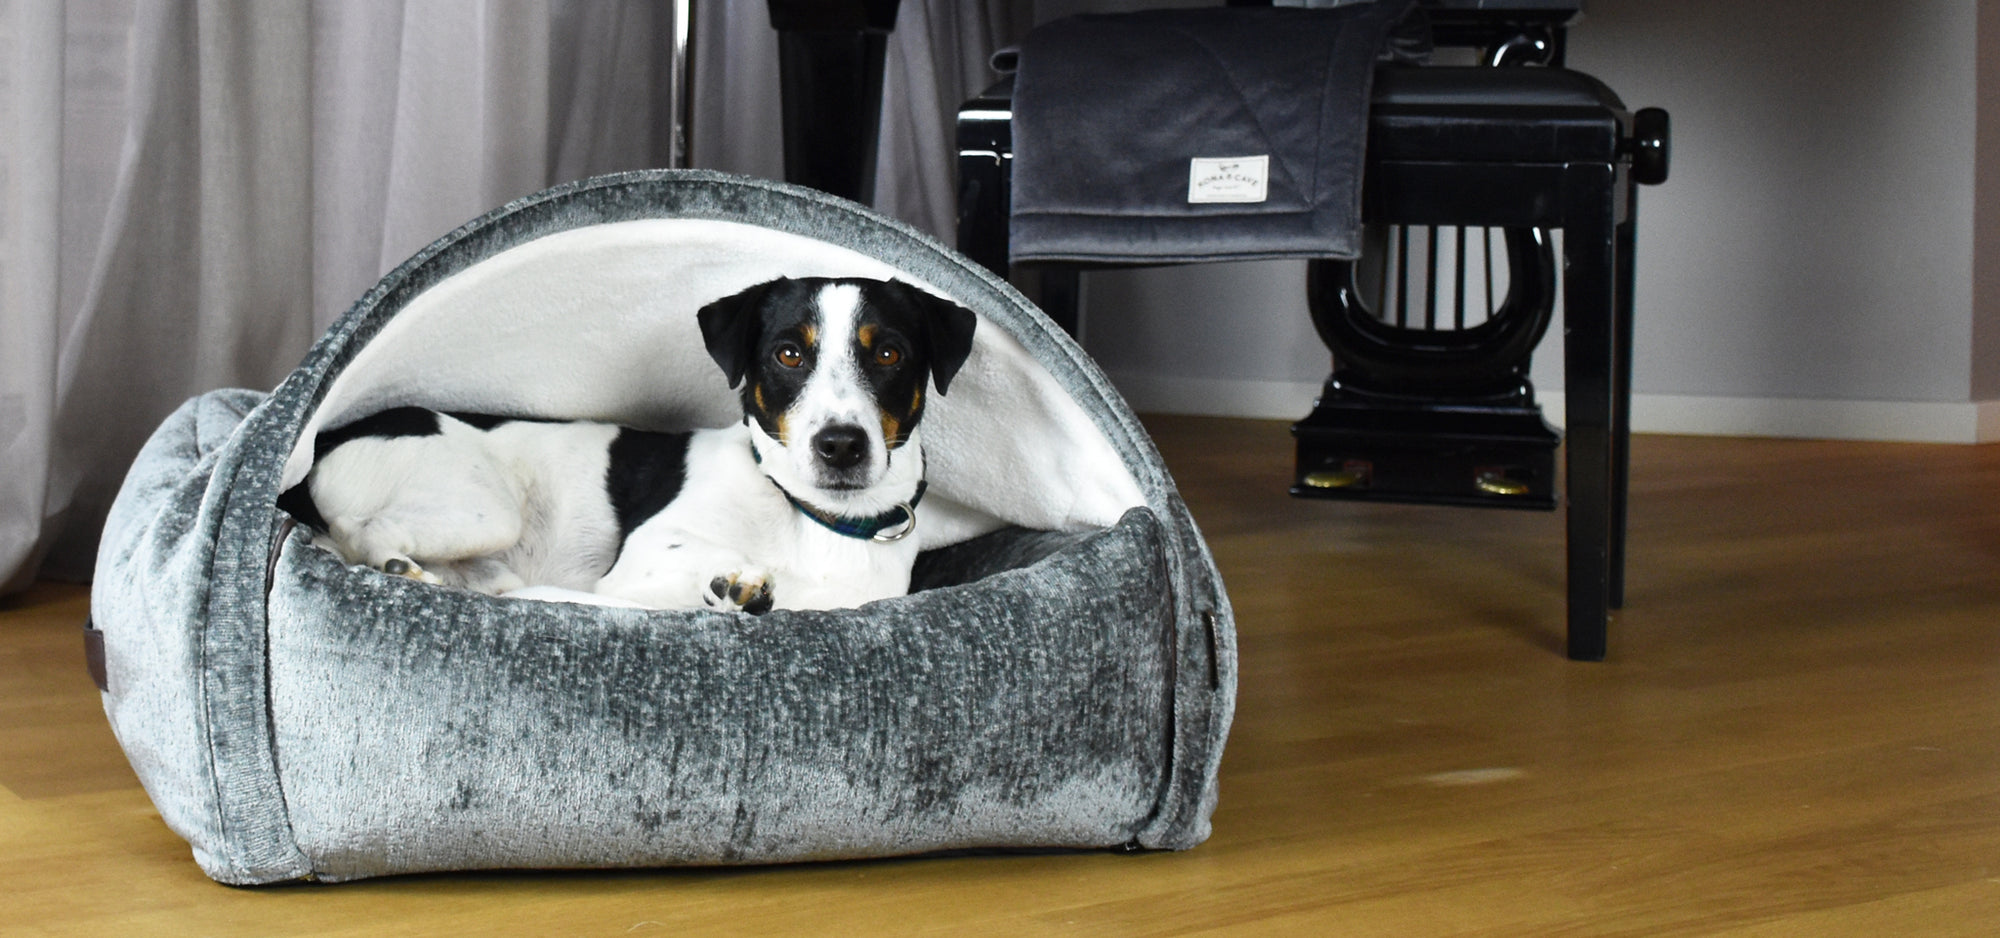 KONA CAVE® luxury canopy cave bed for dogs in grey velvet. Velvet dog bed in front of a Steinway baby grand piano.  Gorgeous try-color JRT sitting in the burrow den bed. 